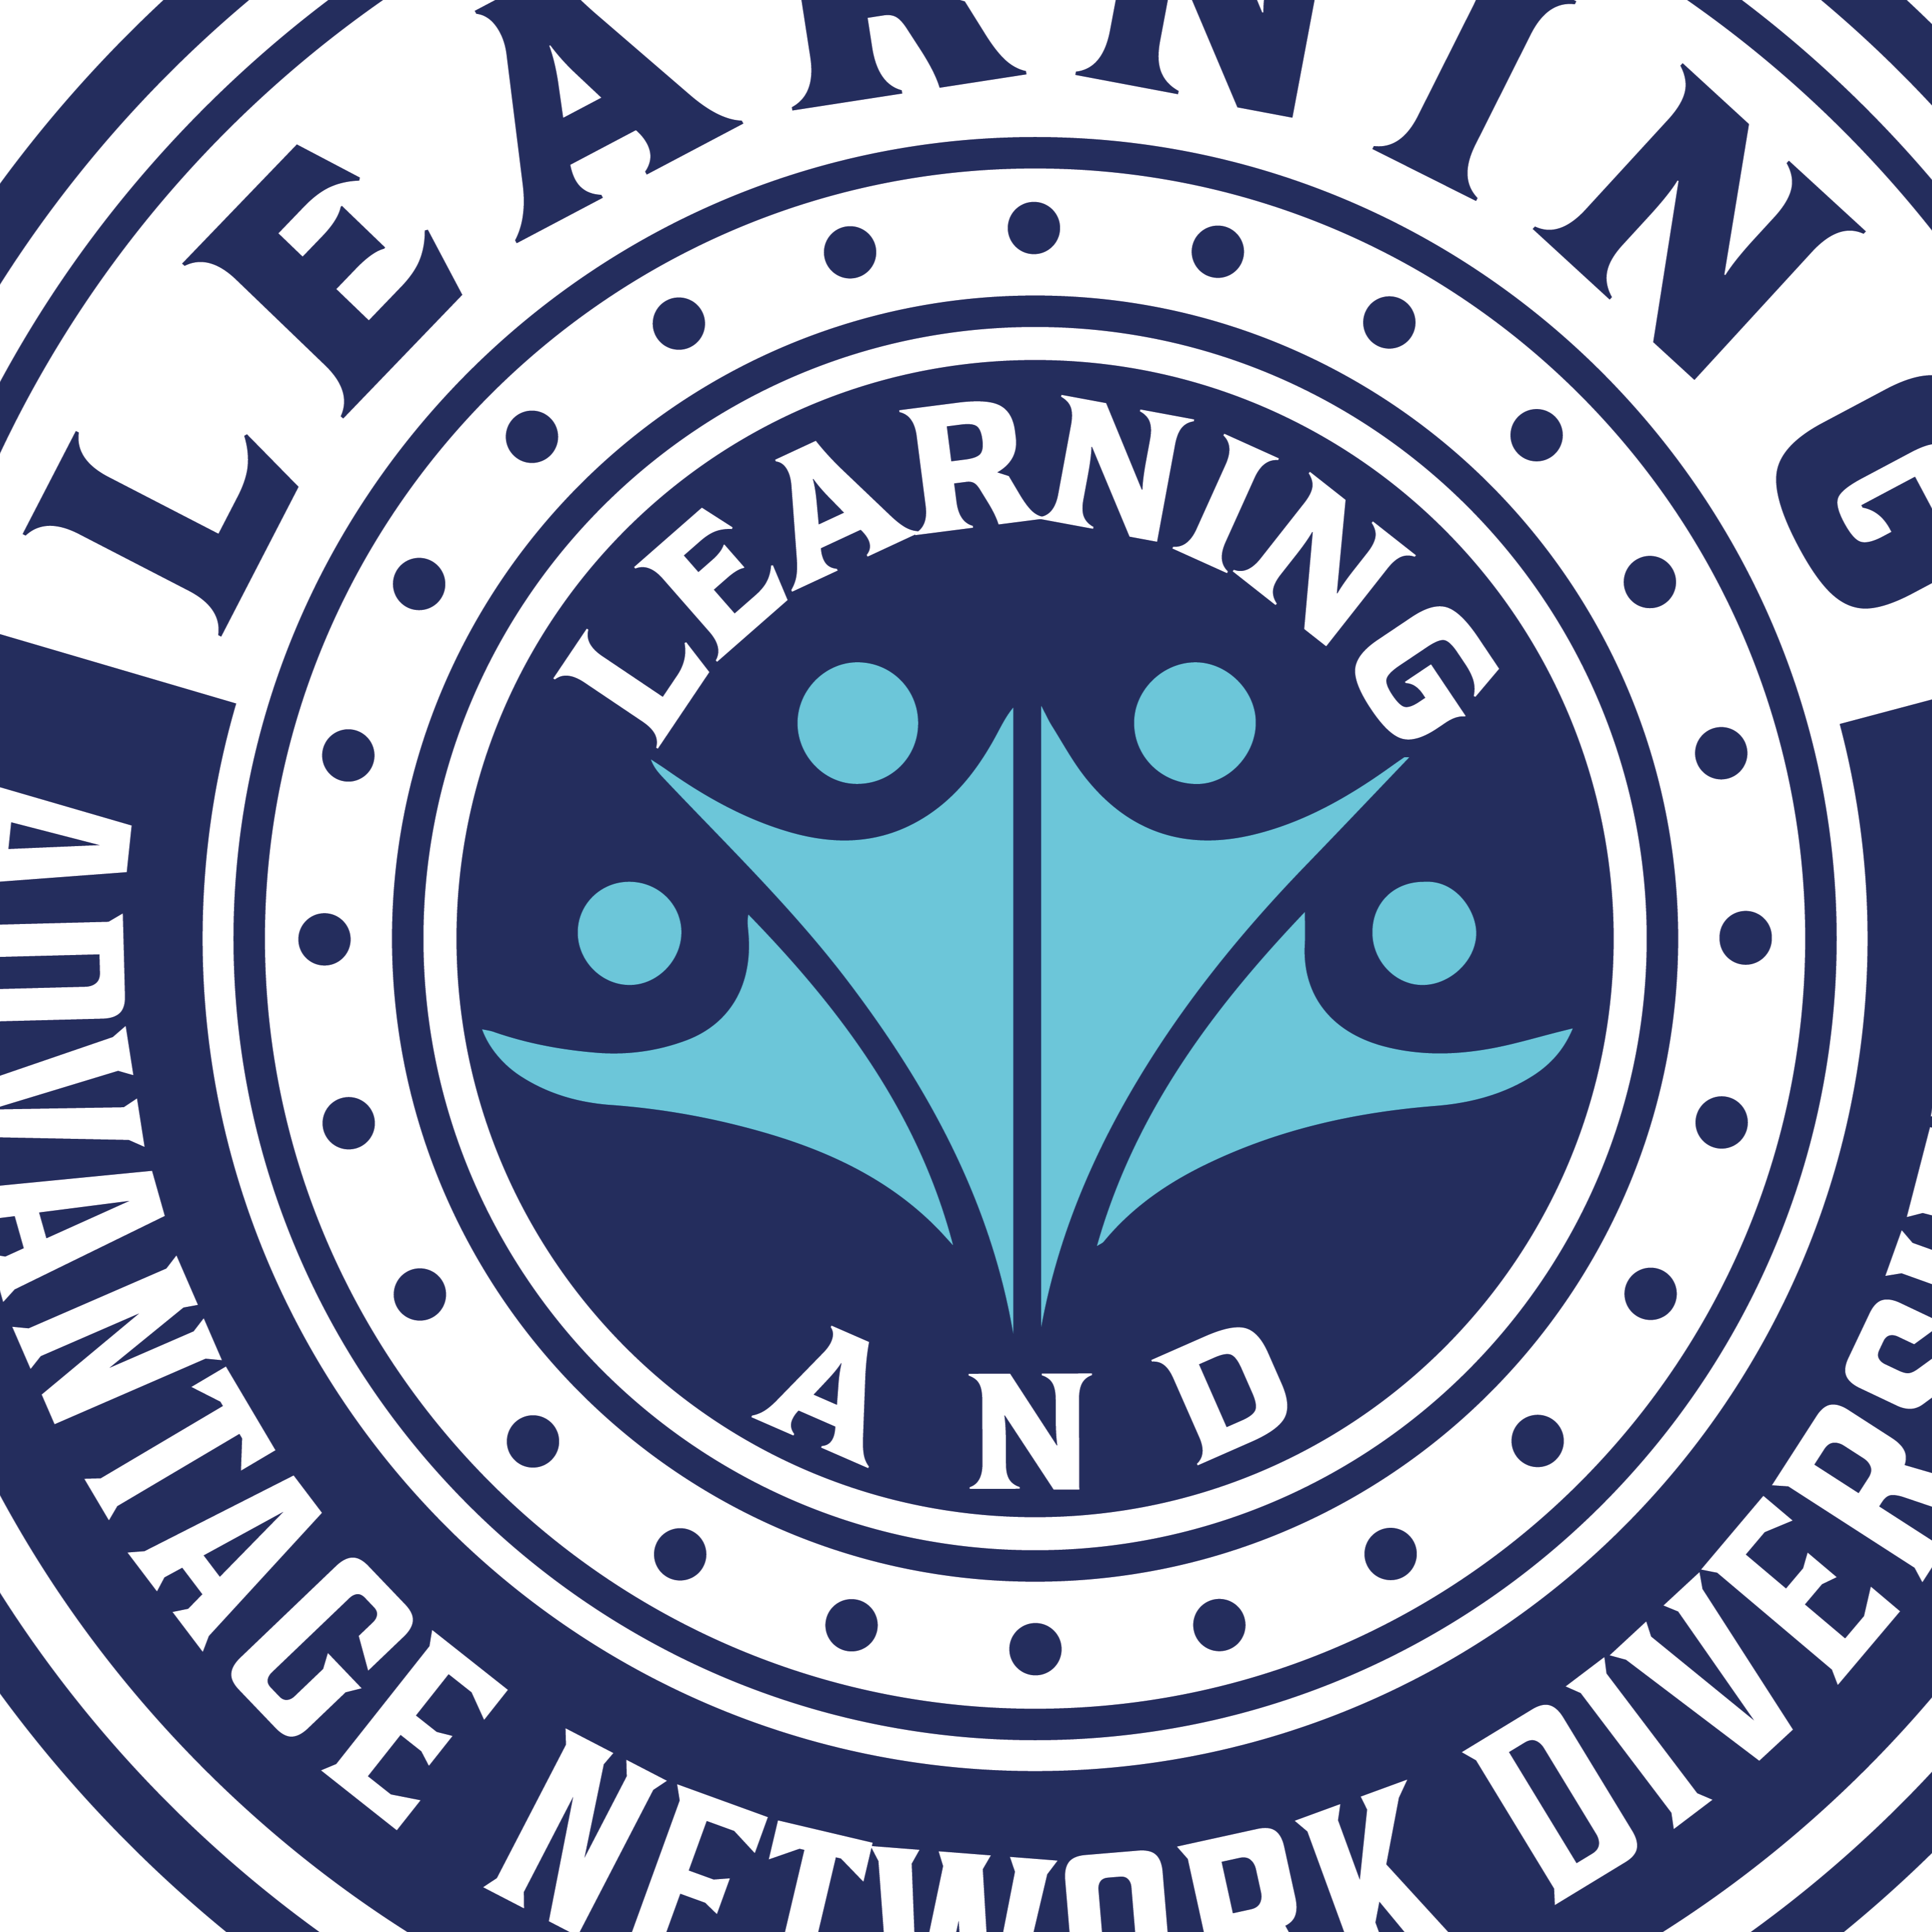 The logo or business face of "Learning Advantage Network Diversified"